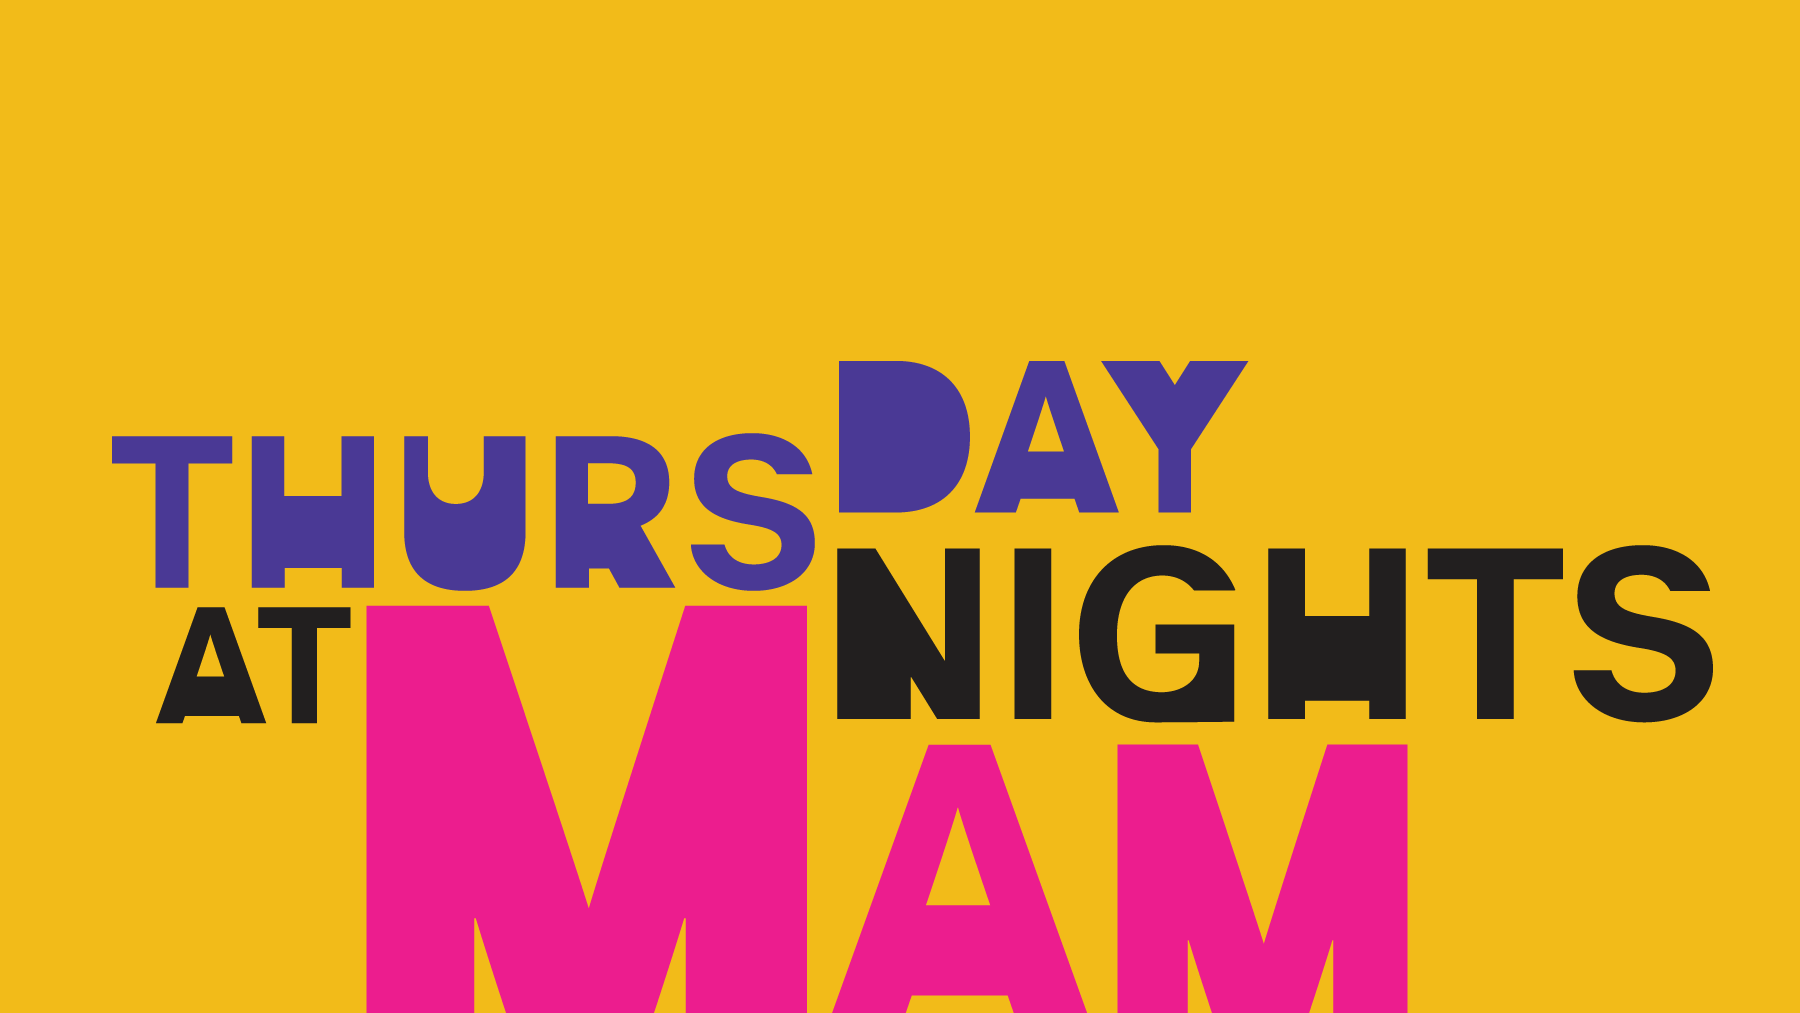 Yellow image with the words Thursday nights at MAM